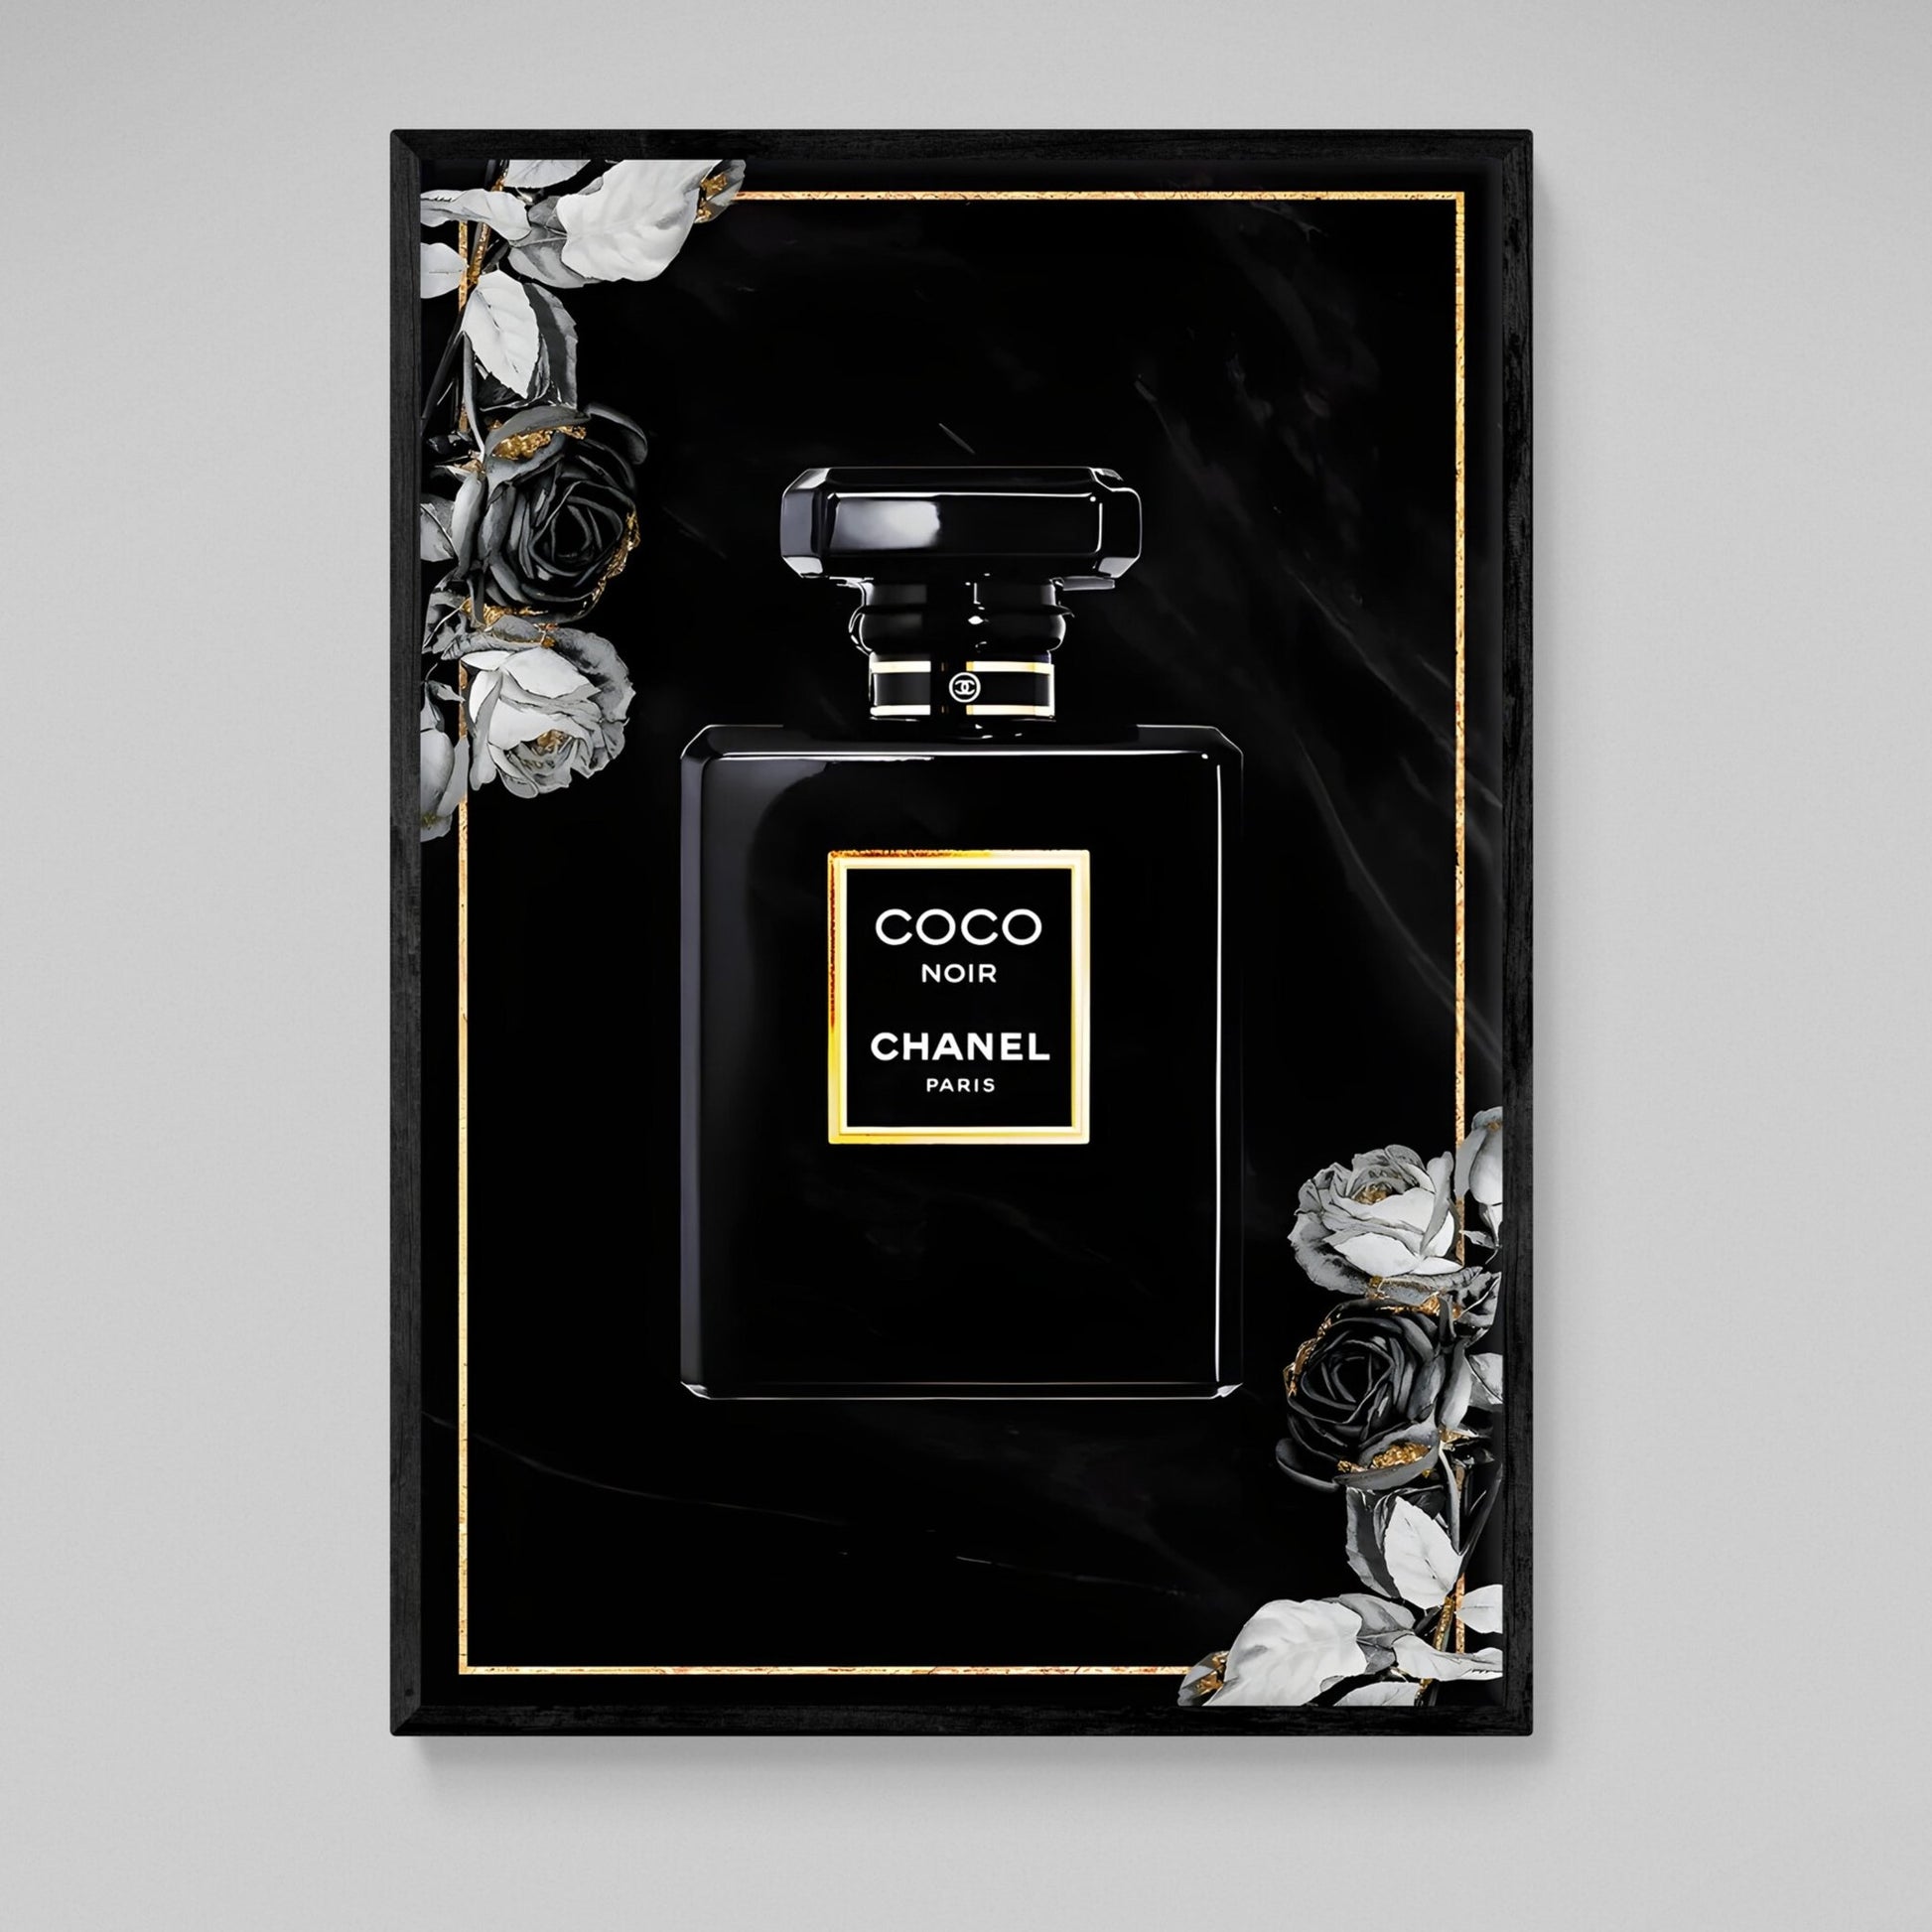 Get the best deals on Chanel Art Prints when you shop the largest